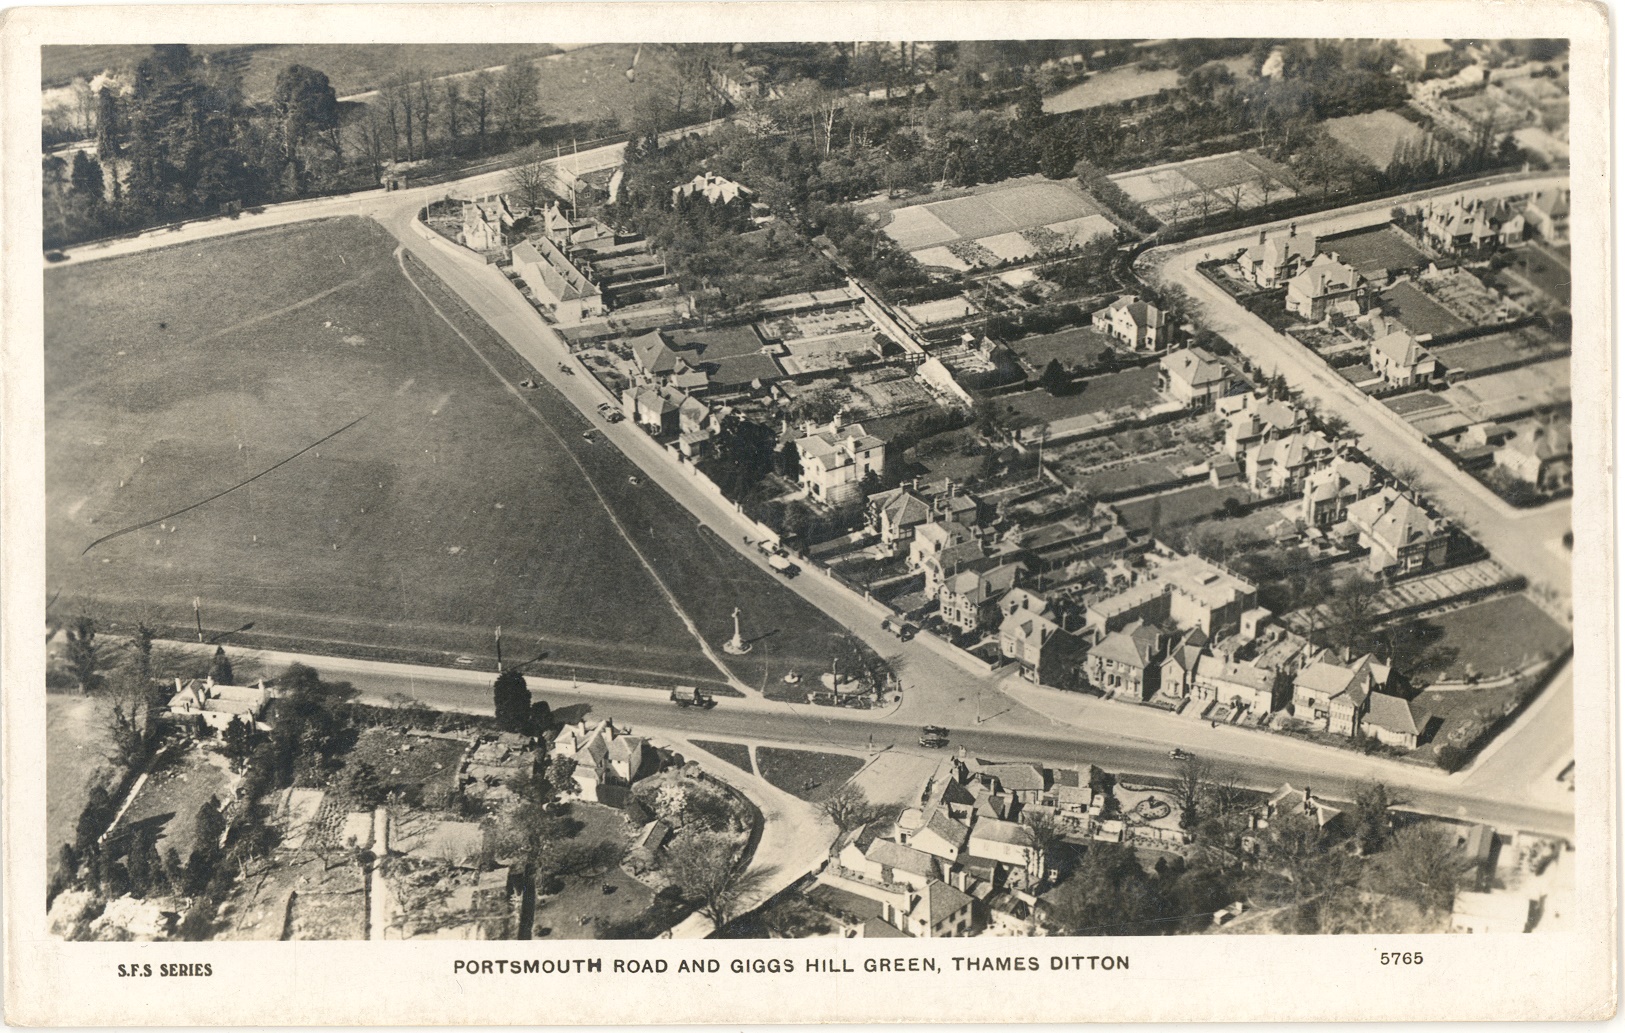 Postcard of an aerial view of Thames Ditton entitled 'Portsmouth Road and Giggs Hill Green.' Portsmouth Road is running along the bottom of the image.